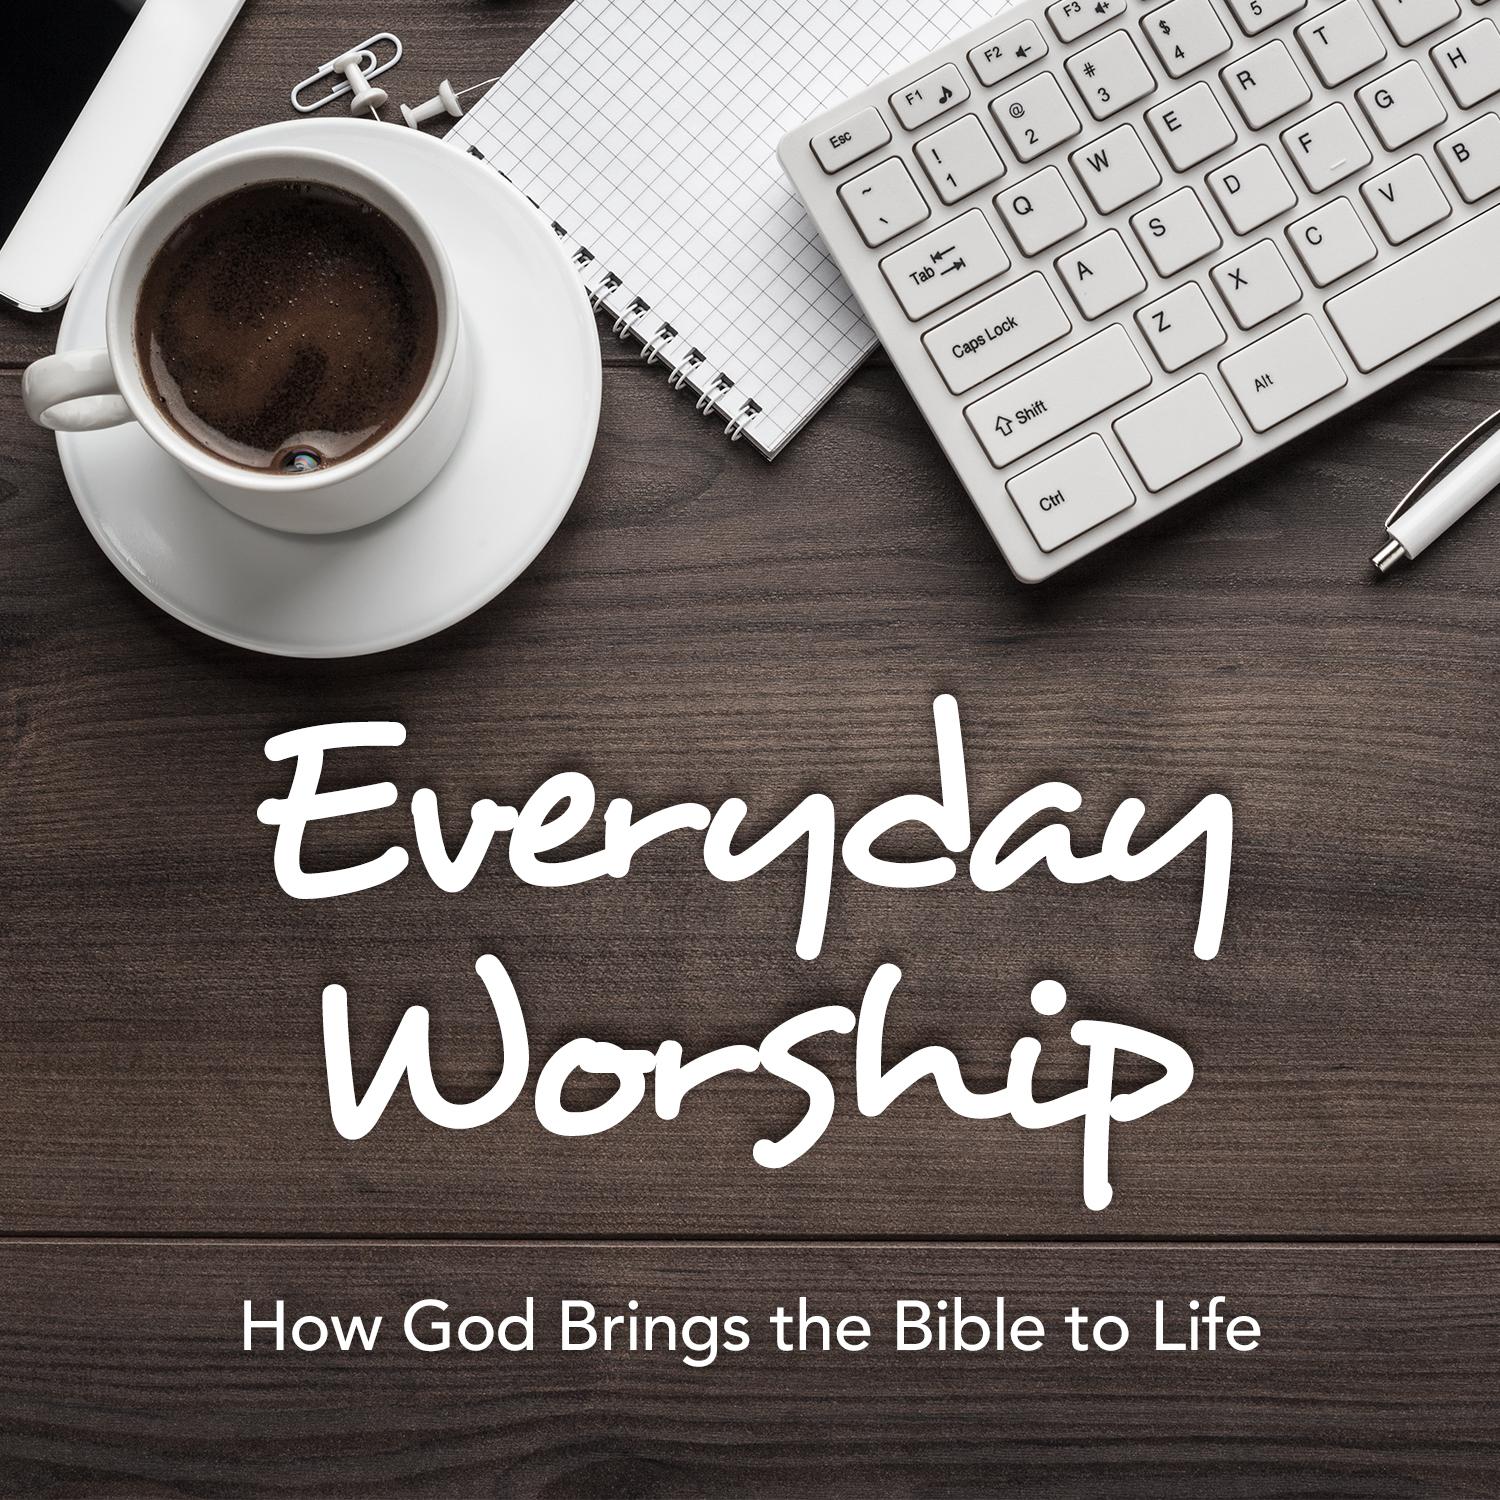 Featured image for Other People Make a Difference…and a Few Tips for the Road! (Session 4: Everyday Worship)